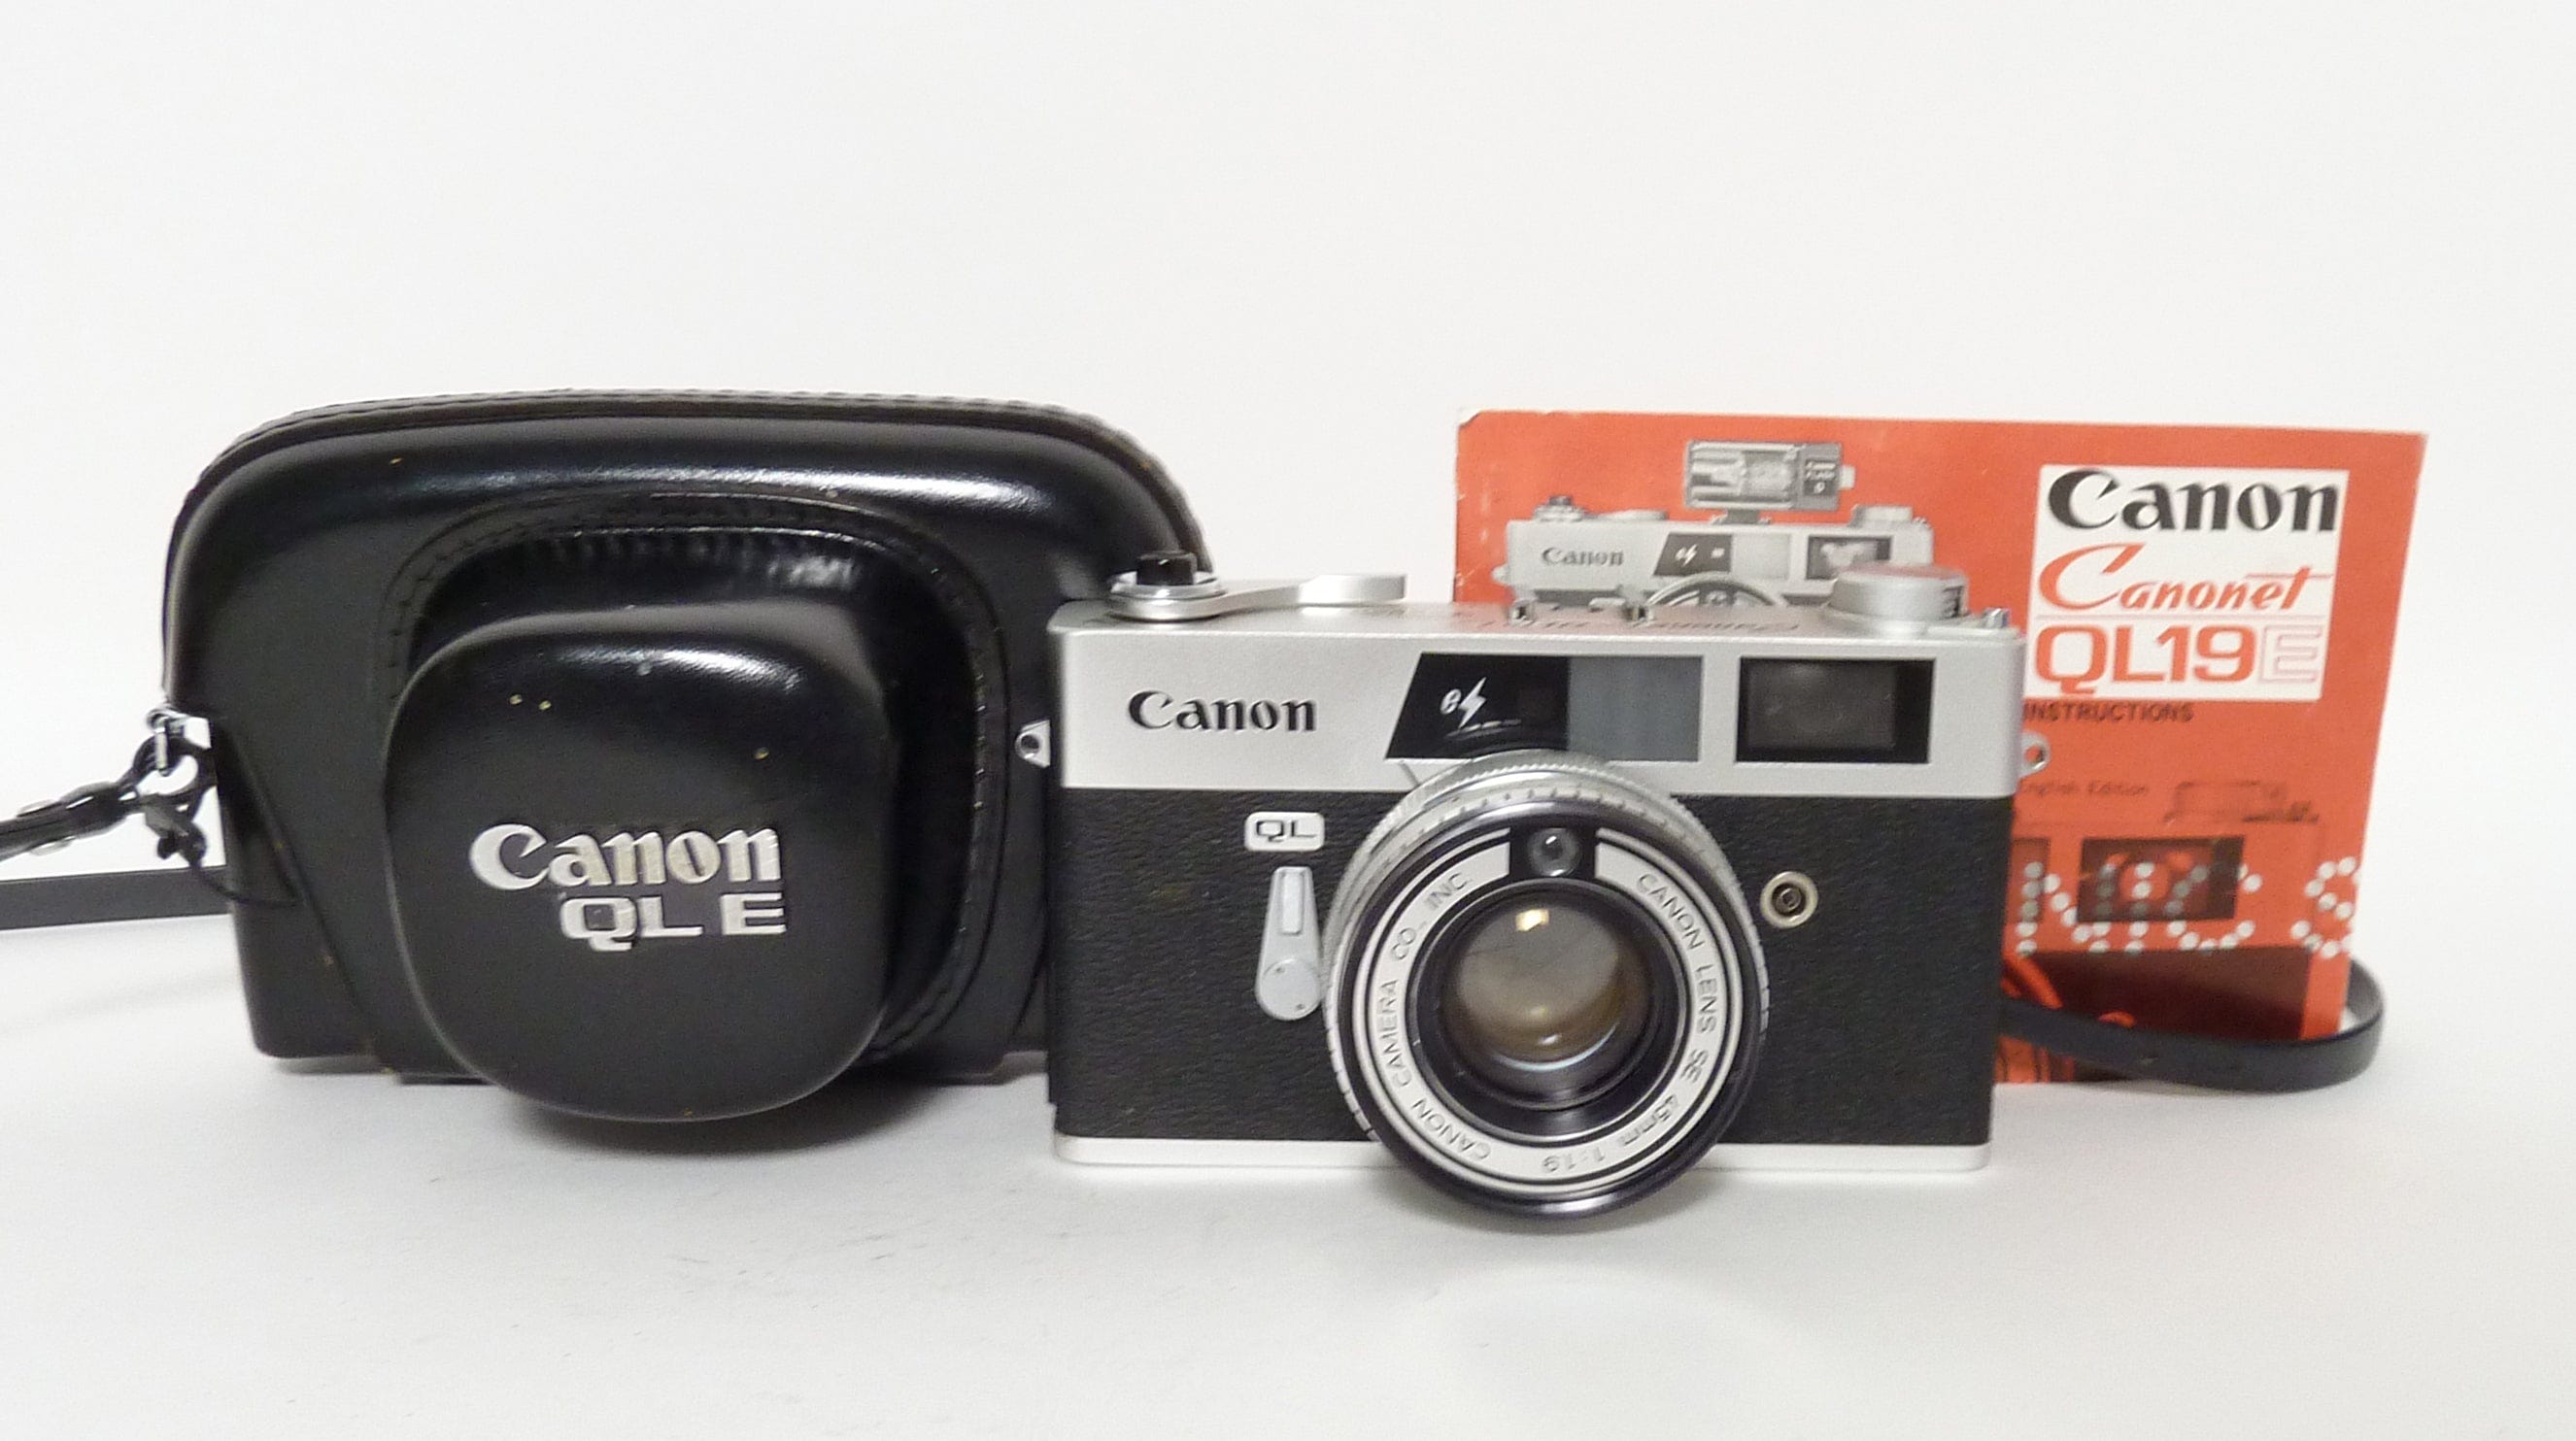 Canon Canonet QL19E with 45mm f1.9 SE Lens and Case